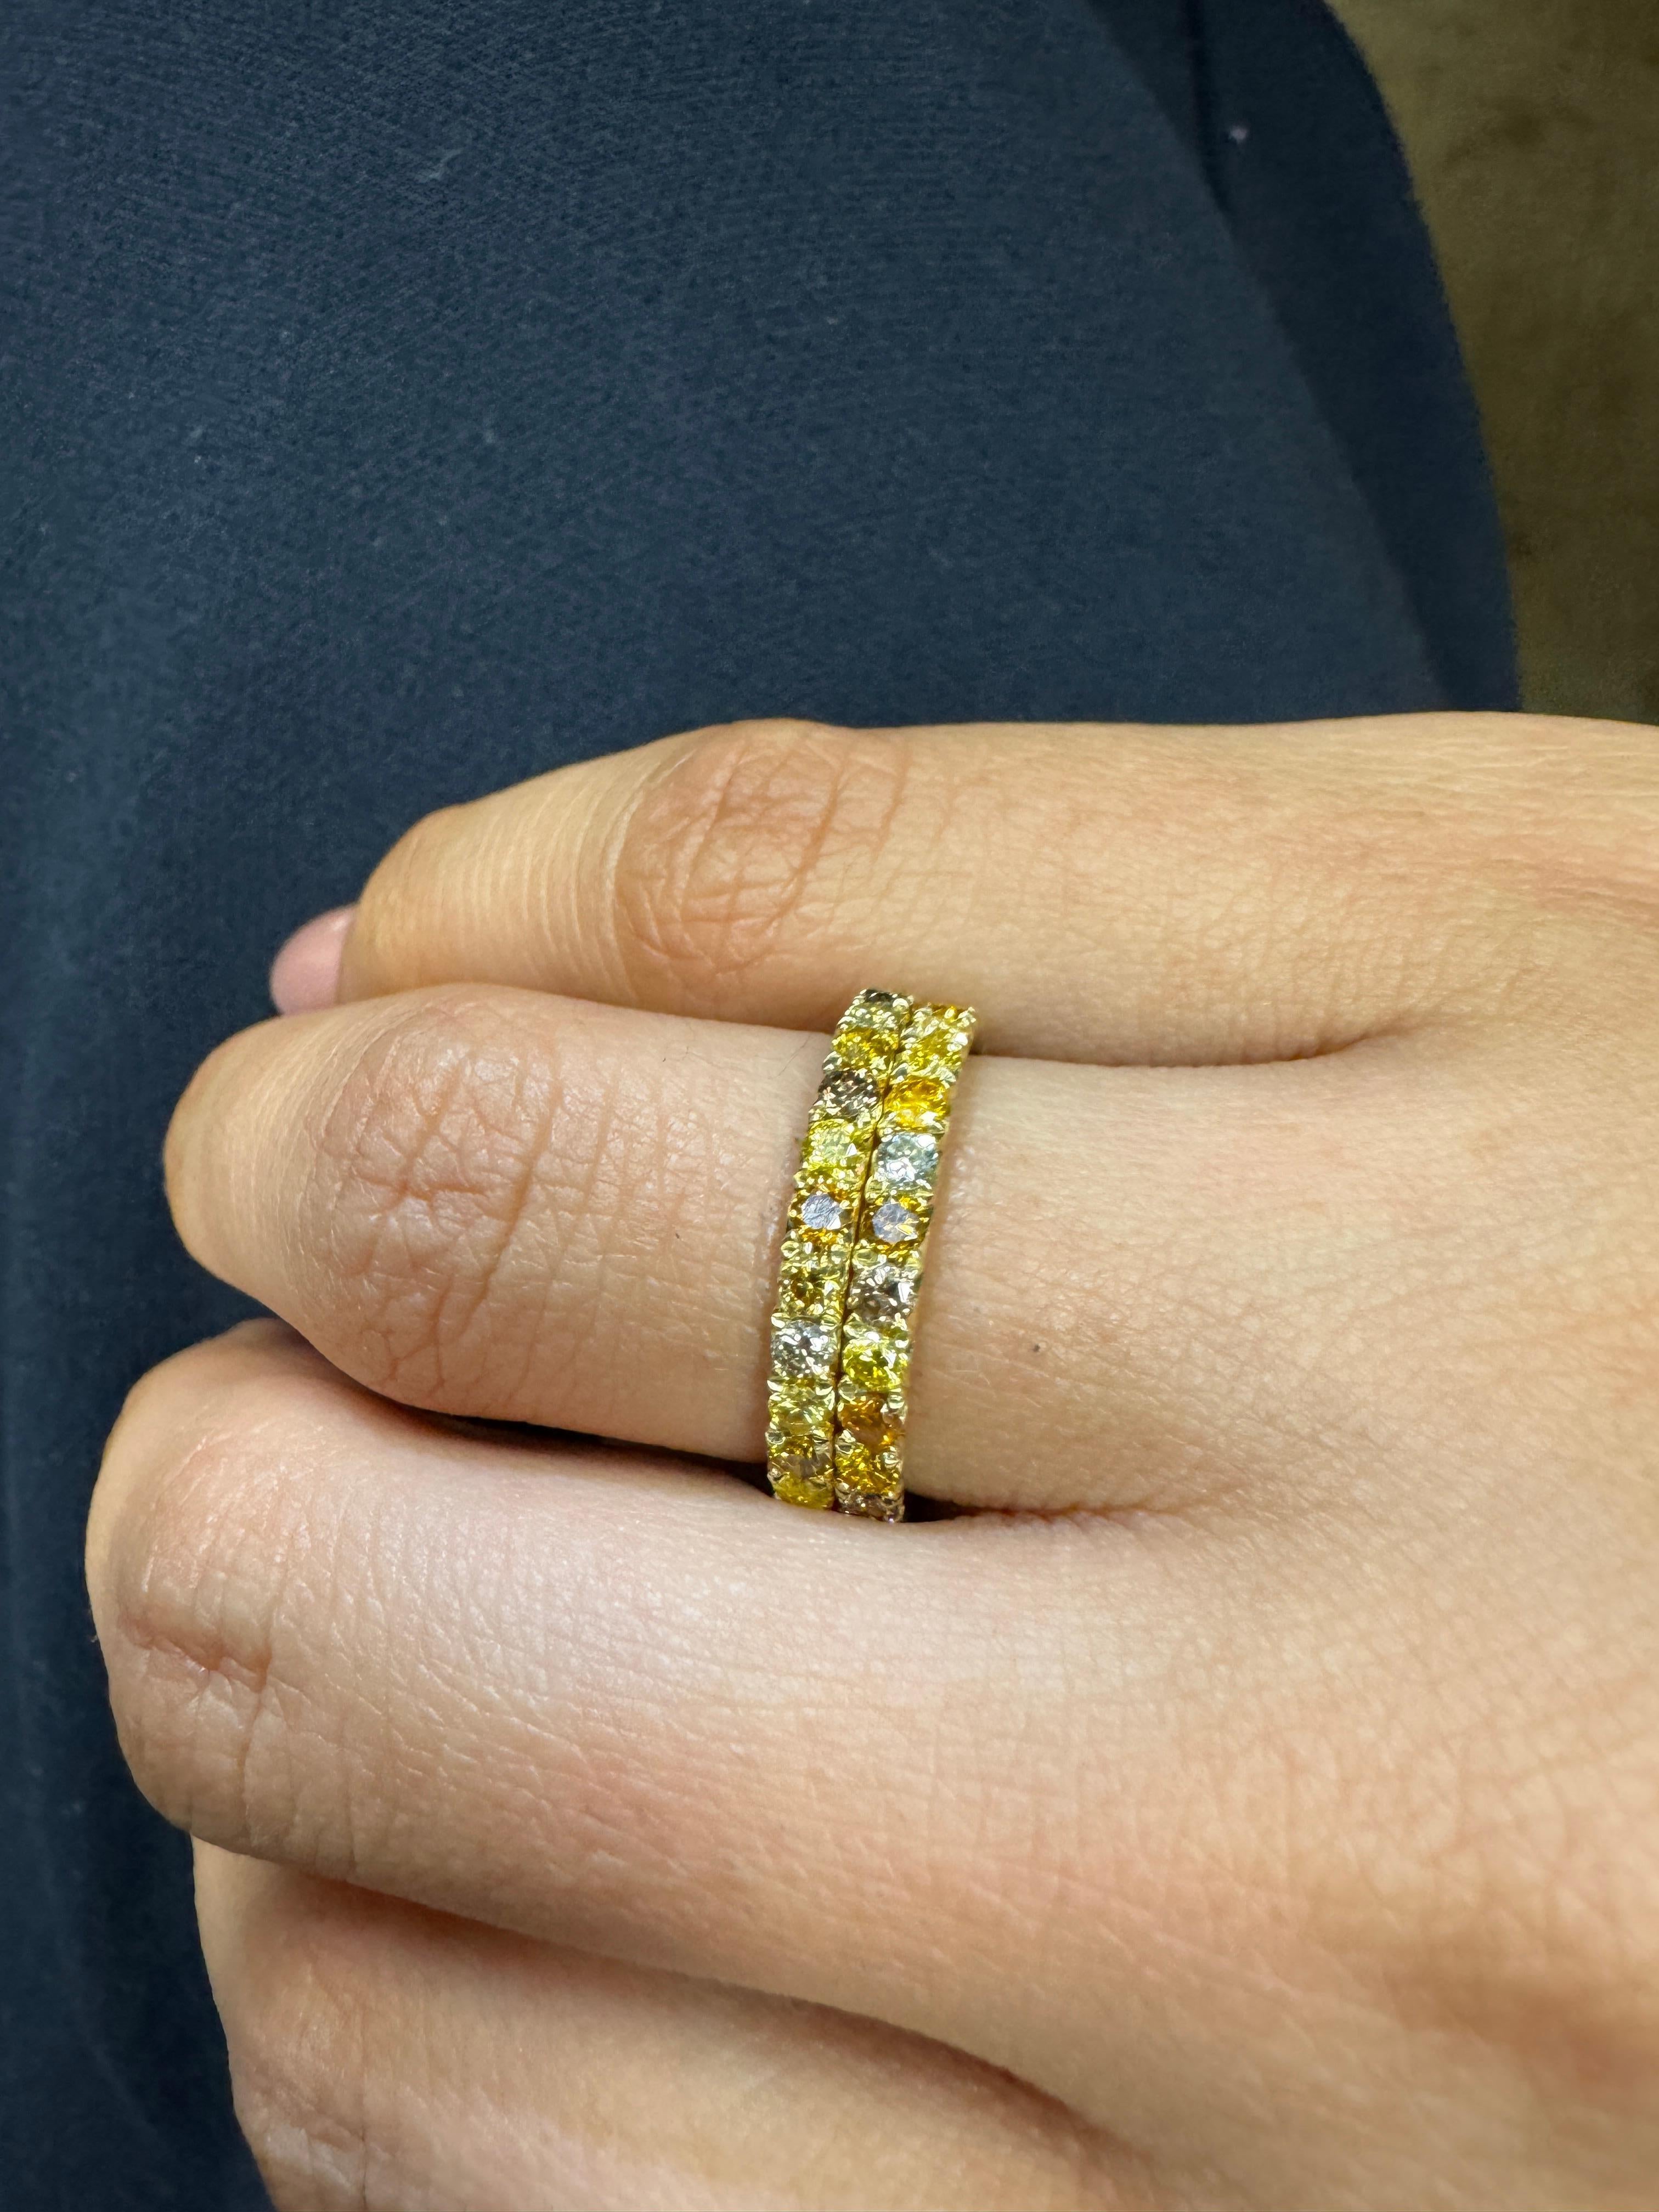 This unique diamond band features an assortment of 27 Fall colored micro-pave round diamonds, 2.25 mm each and 1.35 carats total weight set in French cut style 18K yellow gold band. Diamonds are 100% natural, no color treatment. Total ring weight is